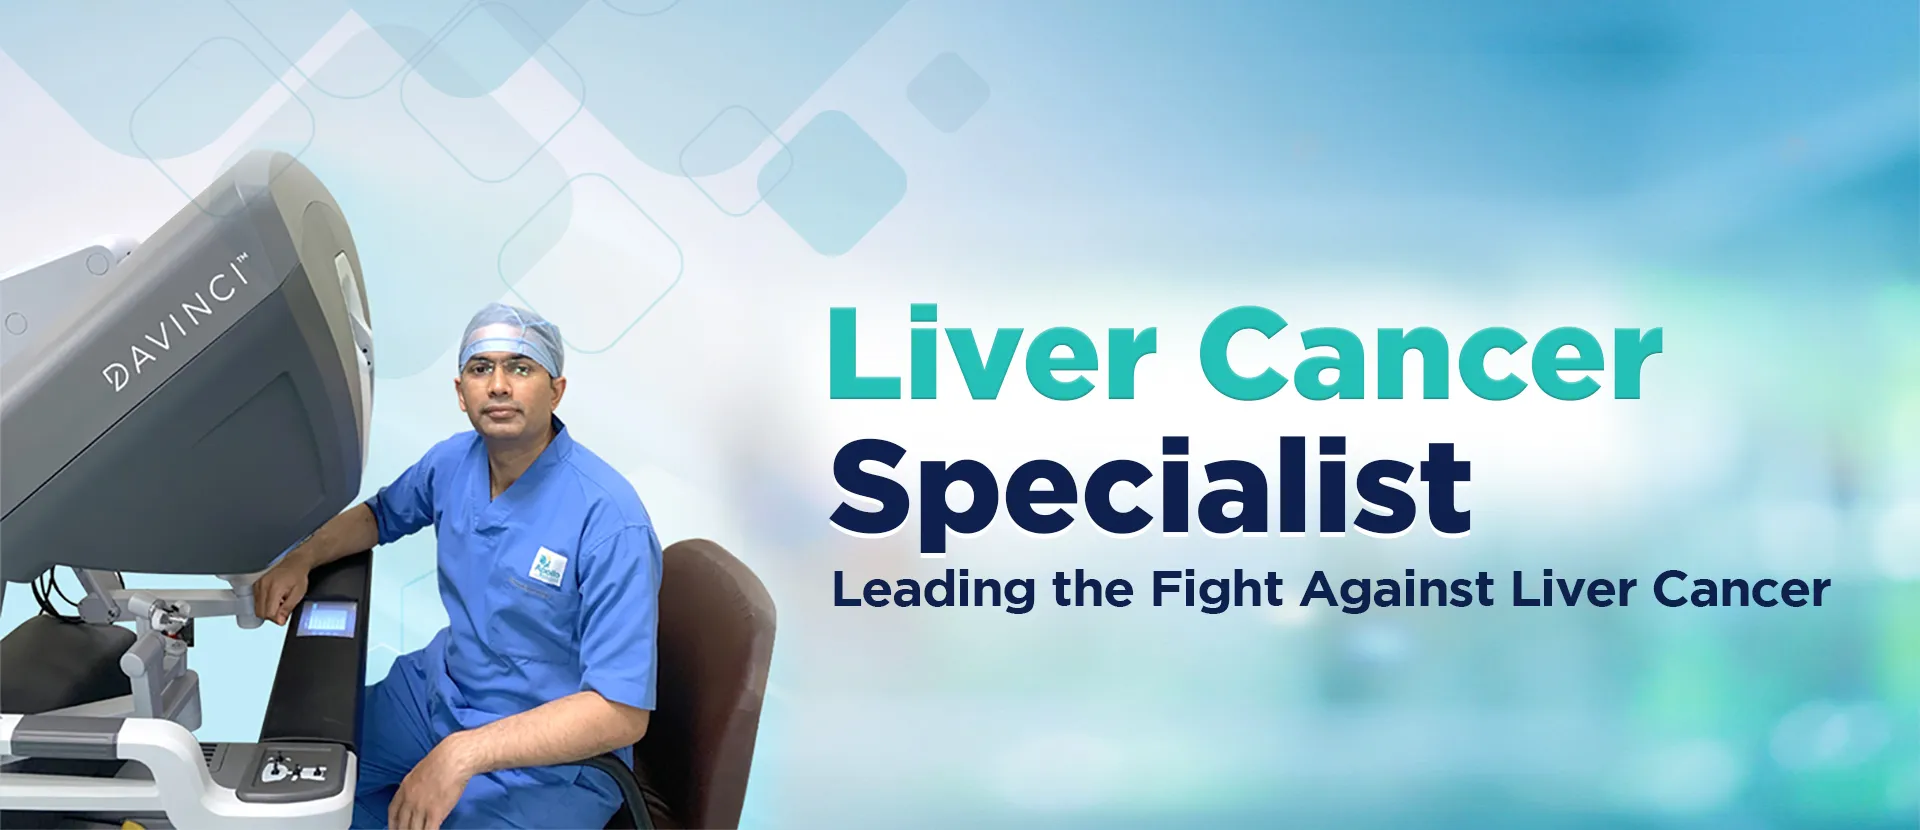 Best Robotic Liver Cancer Specialist in Ahmedabad, Gujarat, India